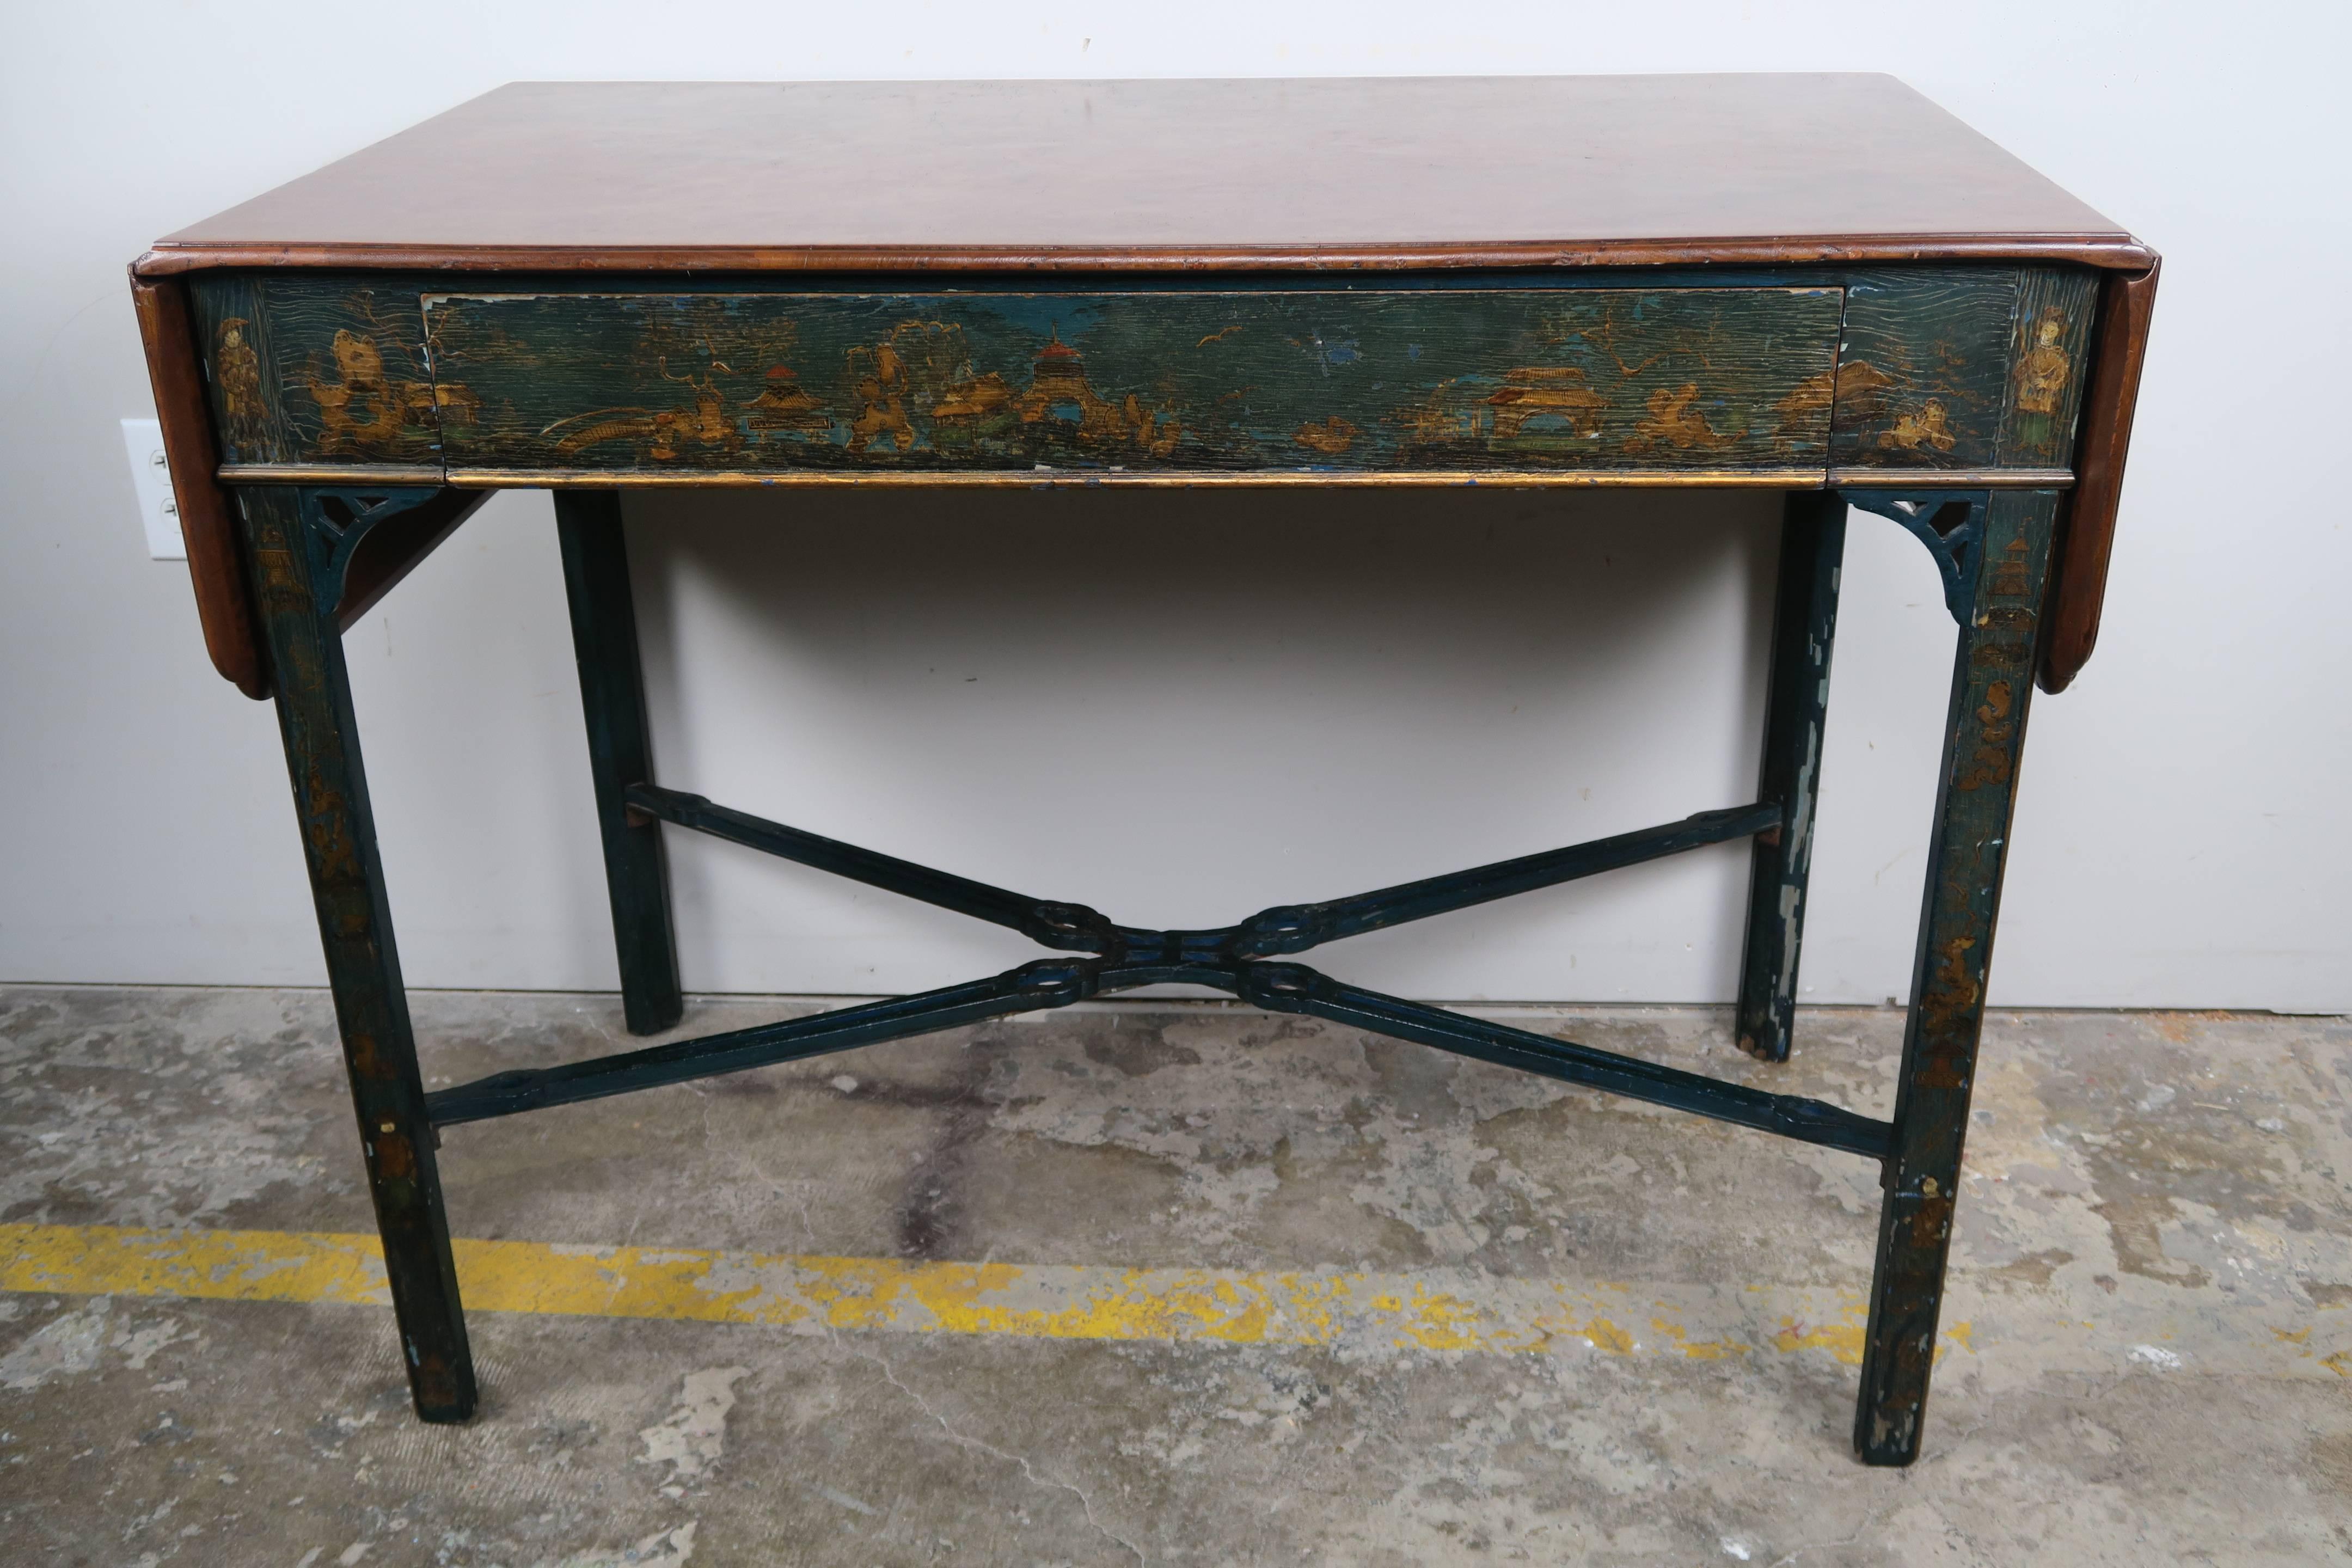 English painted teal colored chinoiserie Chippendale style table with burl walnut drop leaf top. The table has a centre drawer for storage. It stands on four straight legs connected by "X" pierced stretchers. Size of table with leaves